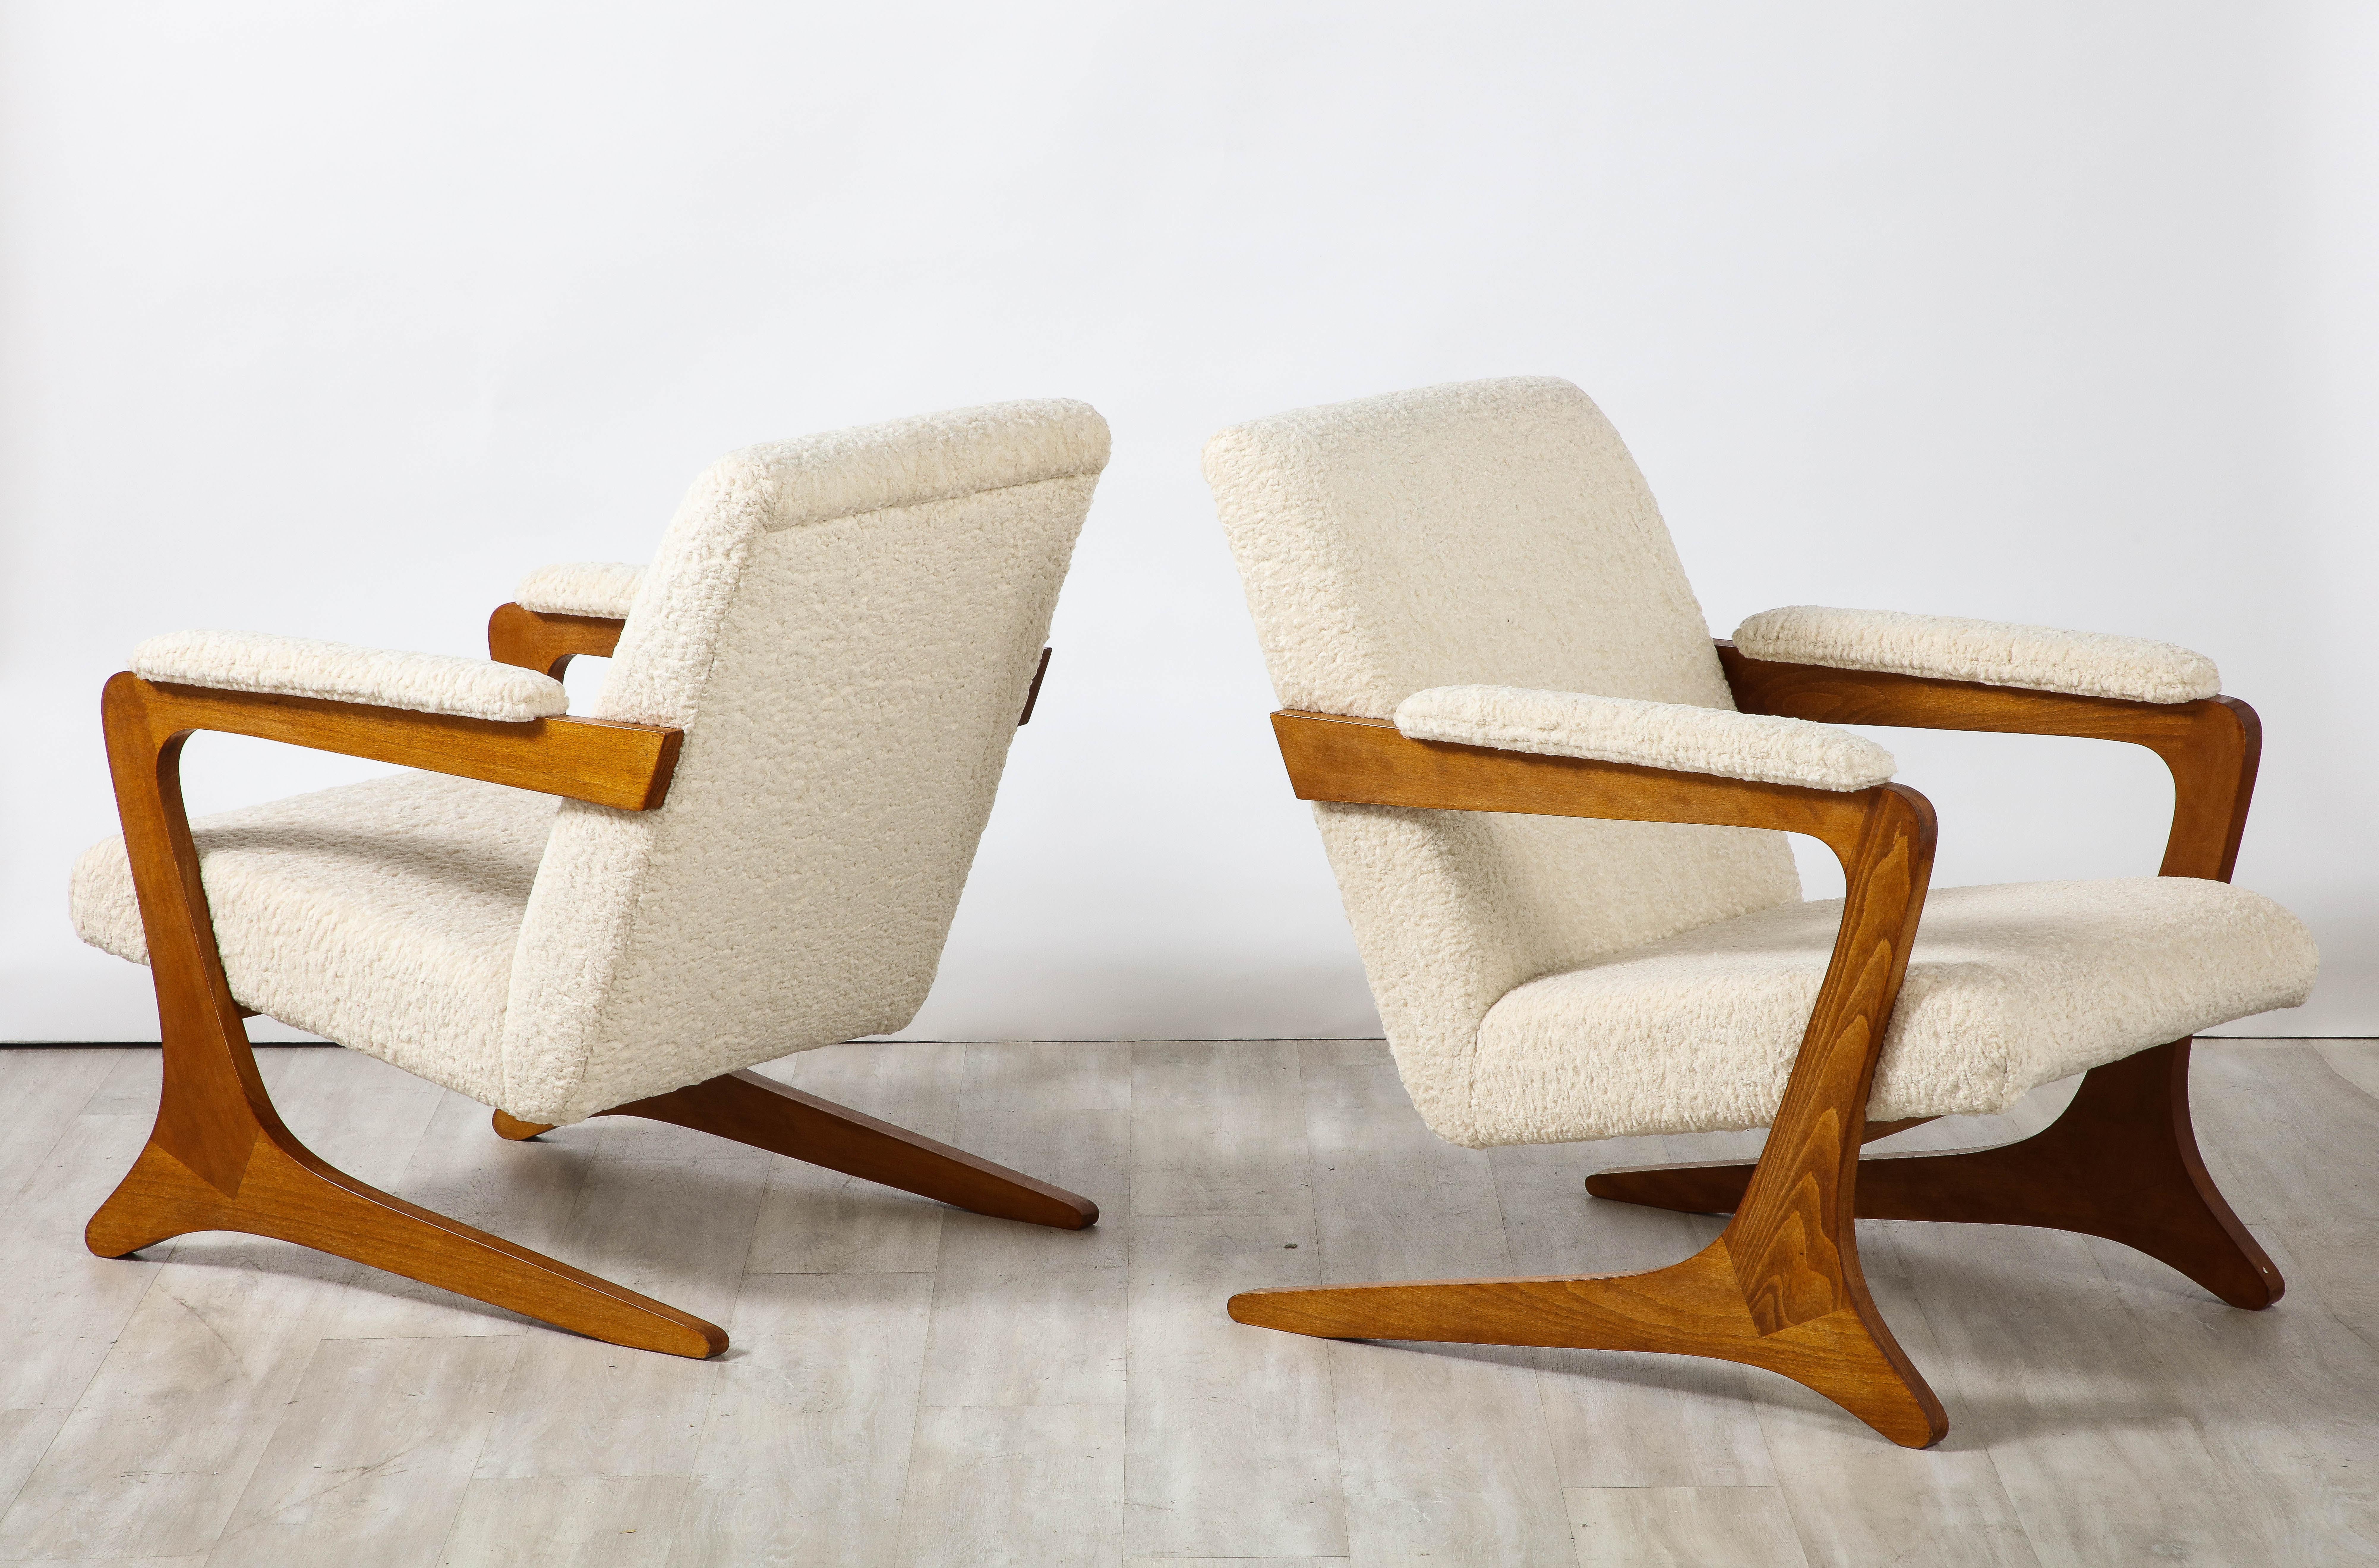 The “Zeca” armchair was designed by the pioneering Brazilian designer, Jose Zanine Caldas. Made of solid wood, this armchair was named after the childhood nickname of the designer.

Design attributed to Jose Zanine Caldas for Móveis Artísticas